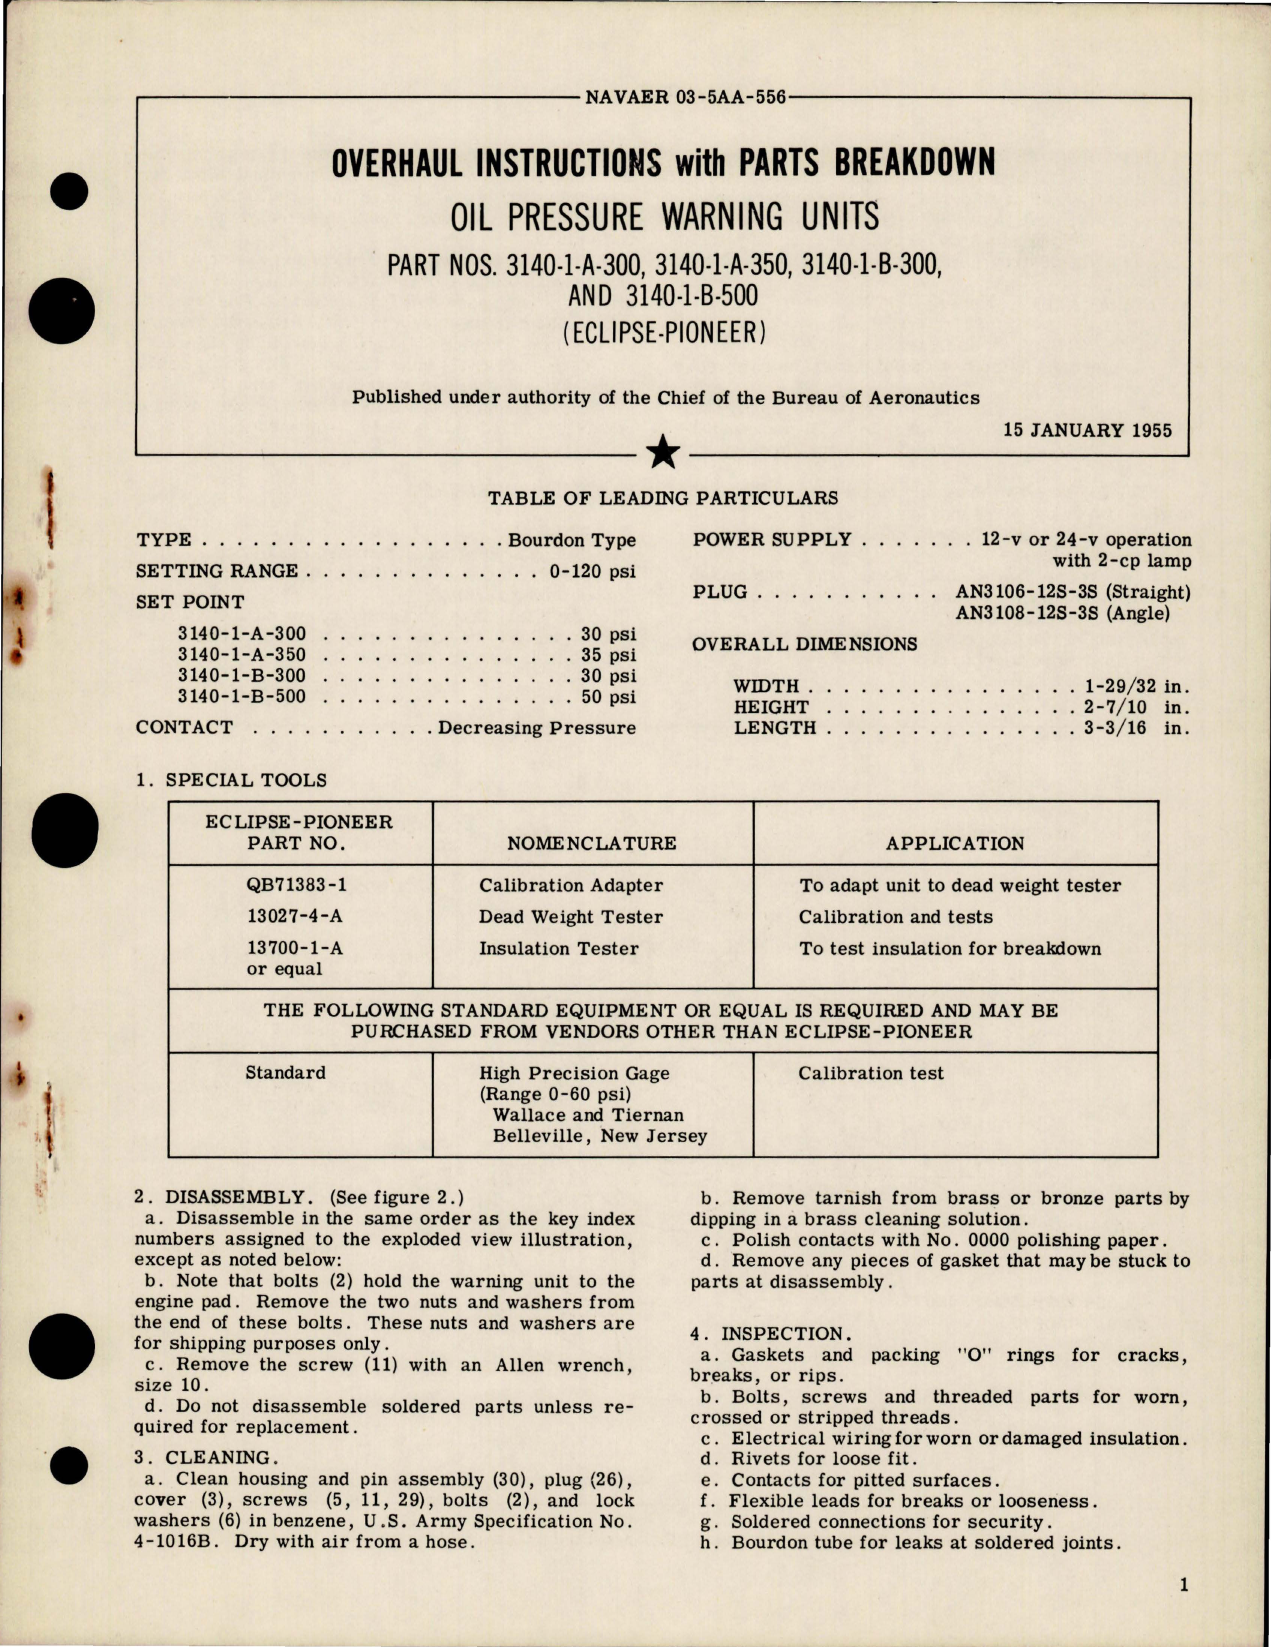 Sample page 1 from AirCorps Library document: Overhaul Instructions with Parts Breakdown for Oil Pressure Warning Units 